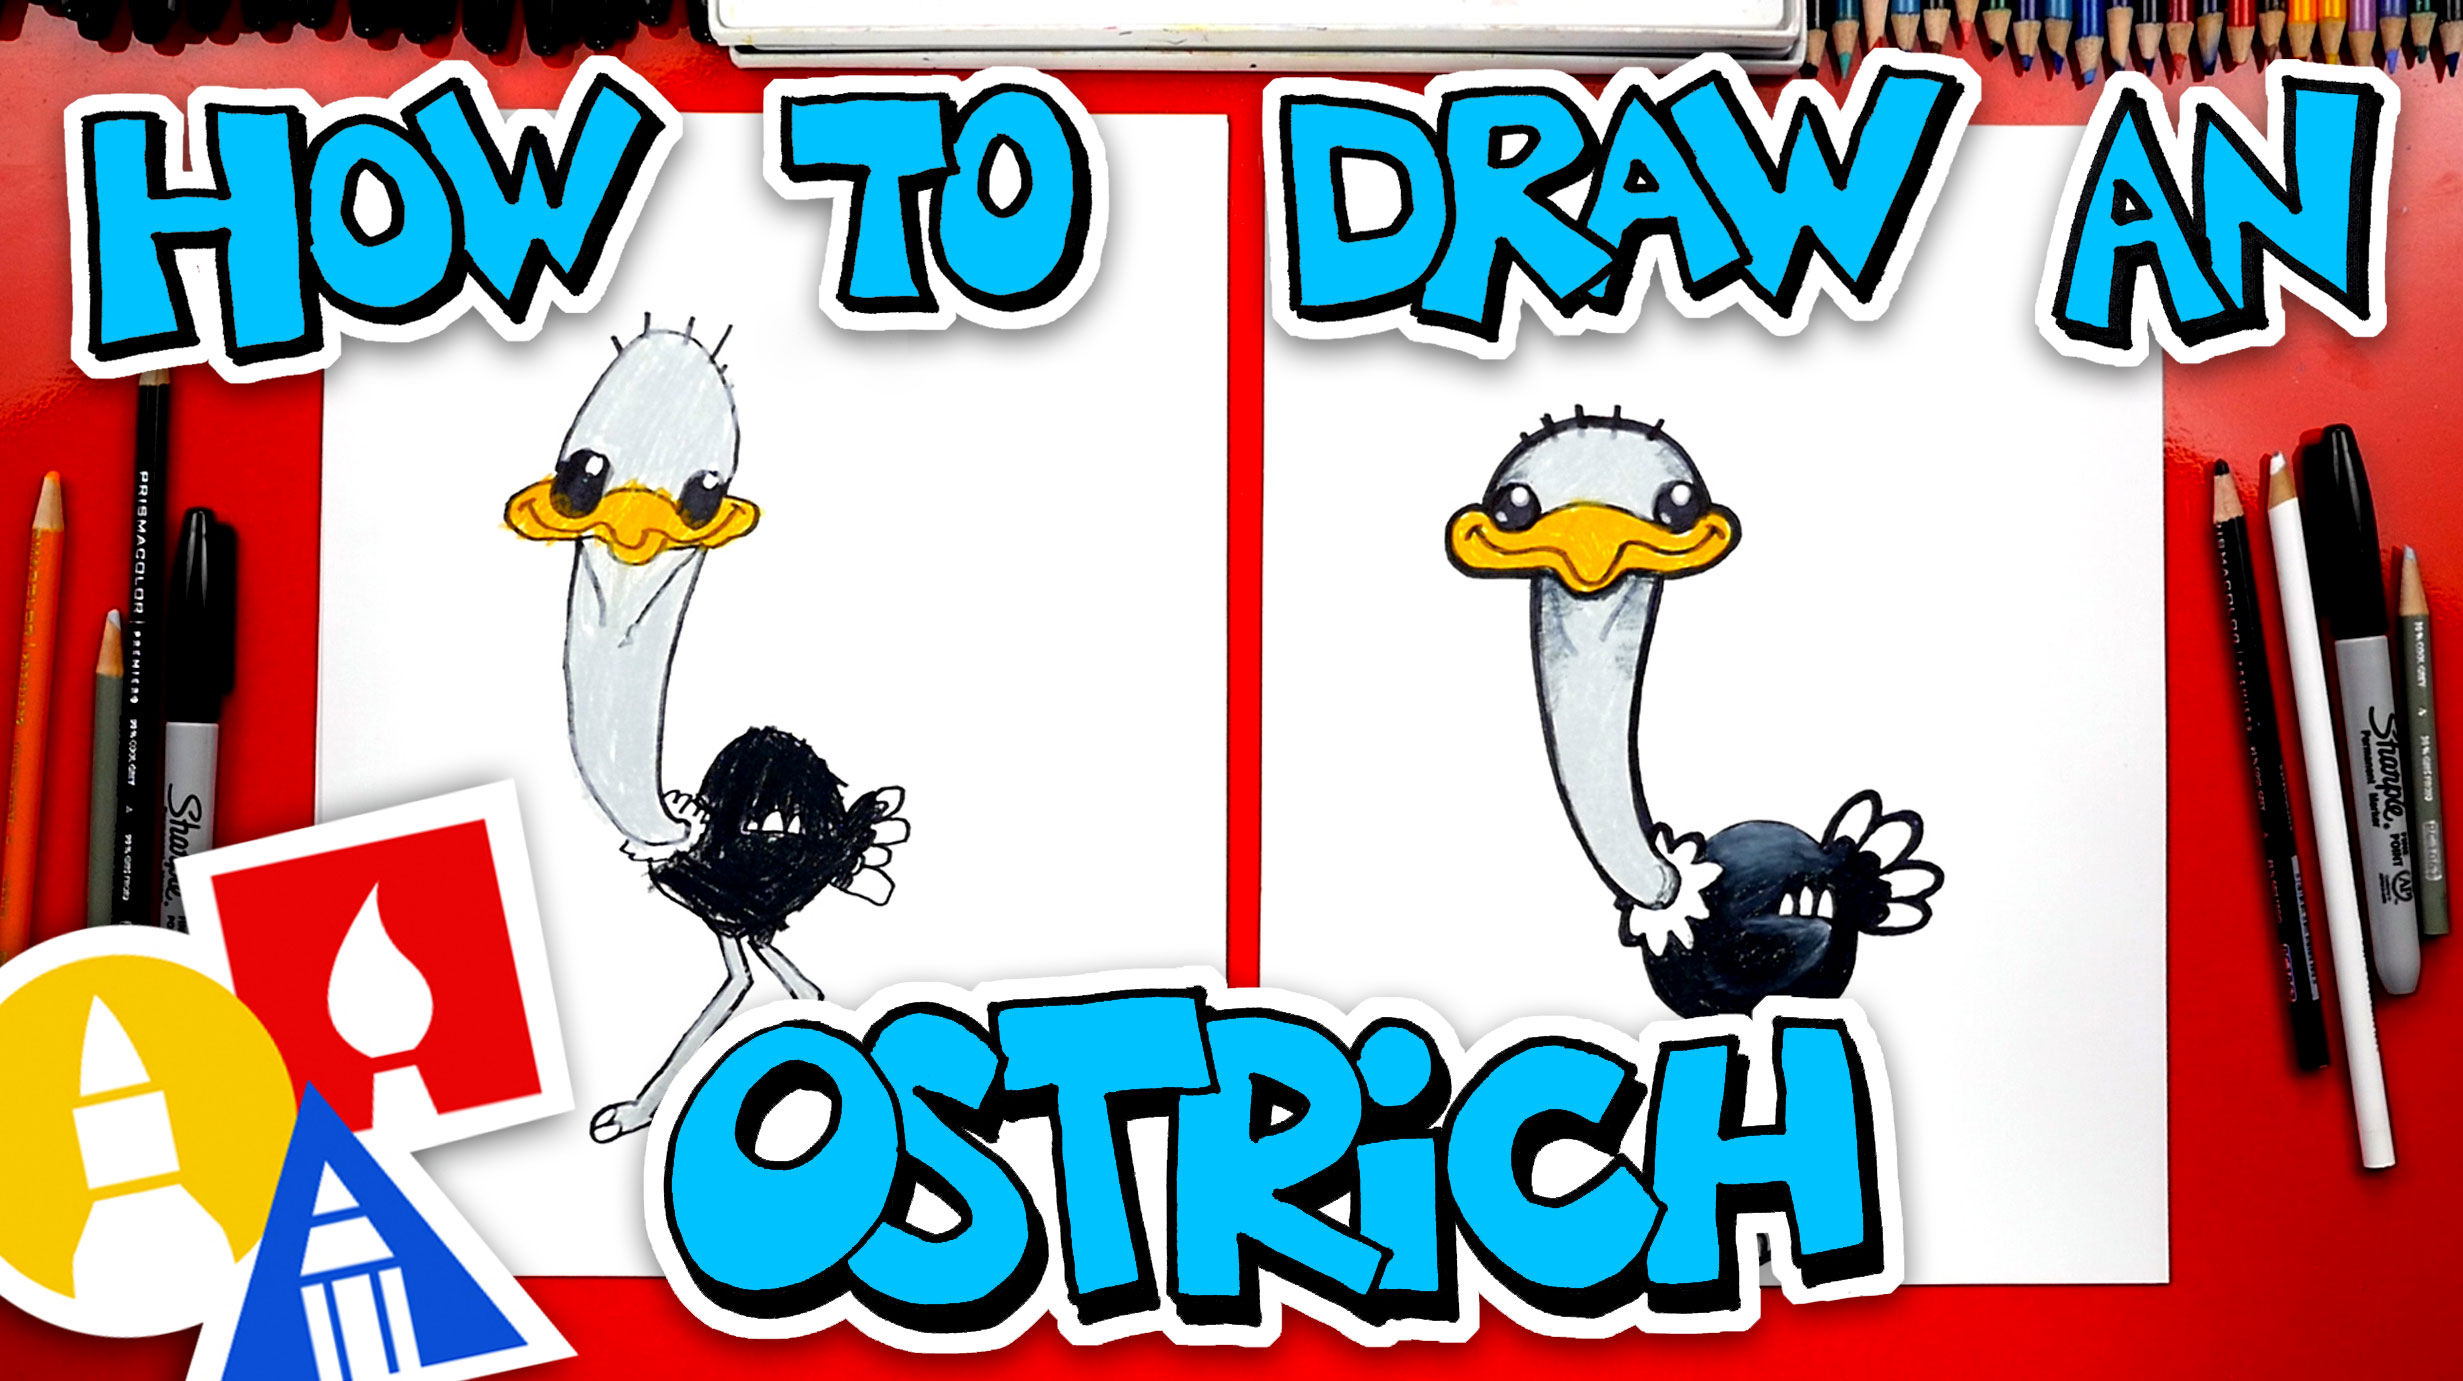 How To Draw A Funny Cartoon Ostrich - Art For Kids Hub -